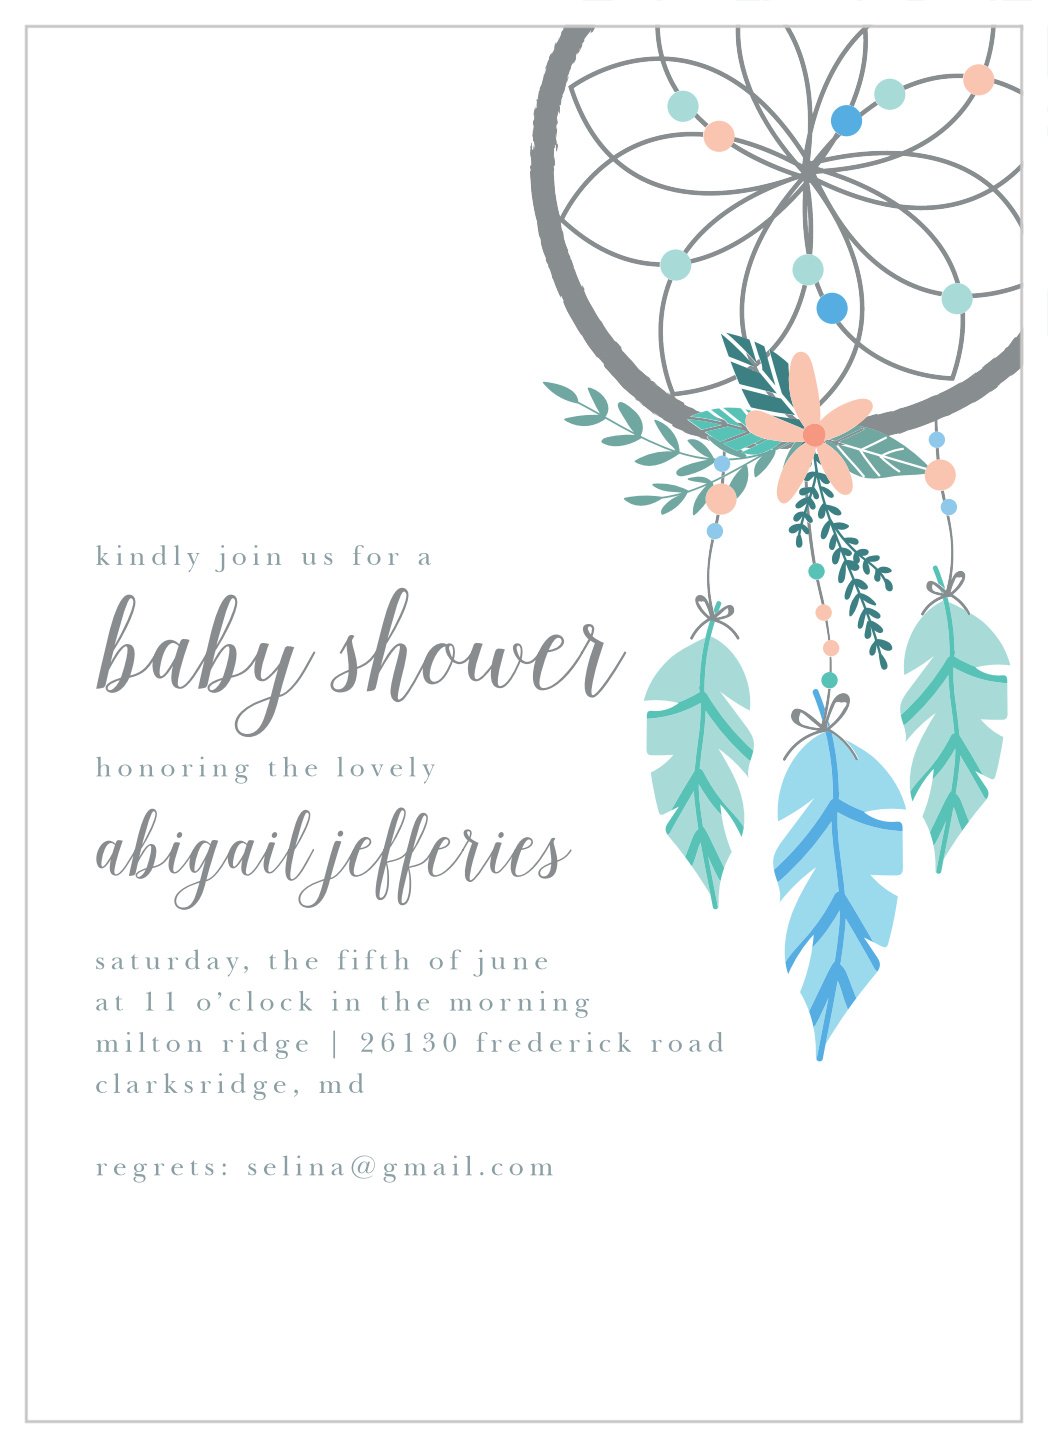 baby shower theme is a dream catcher